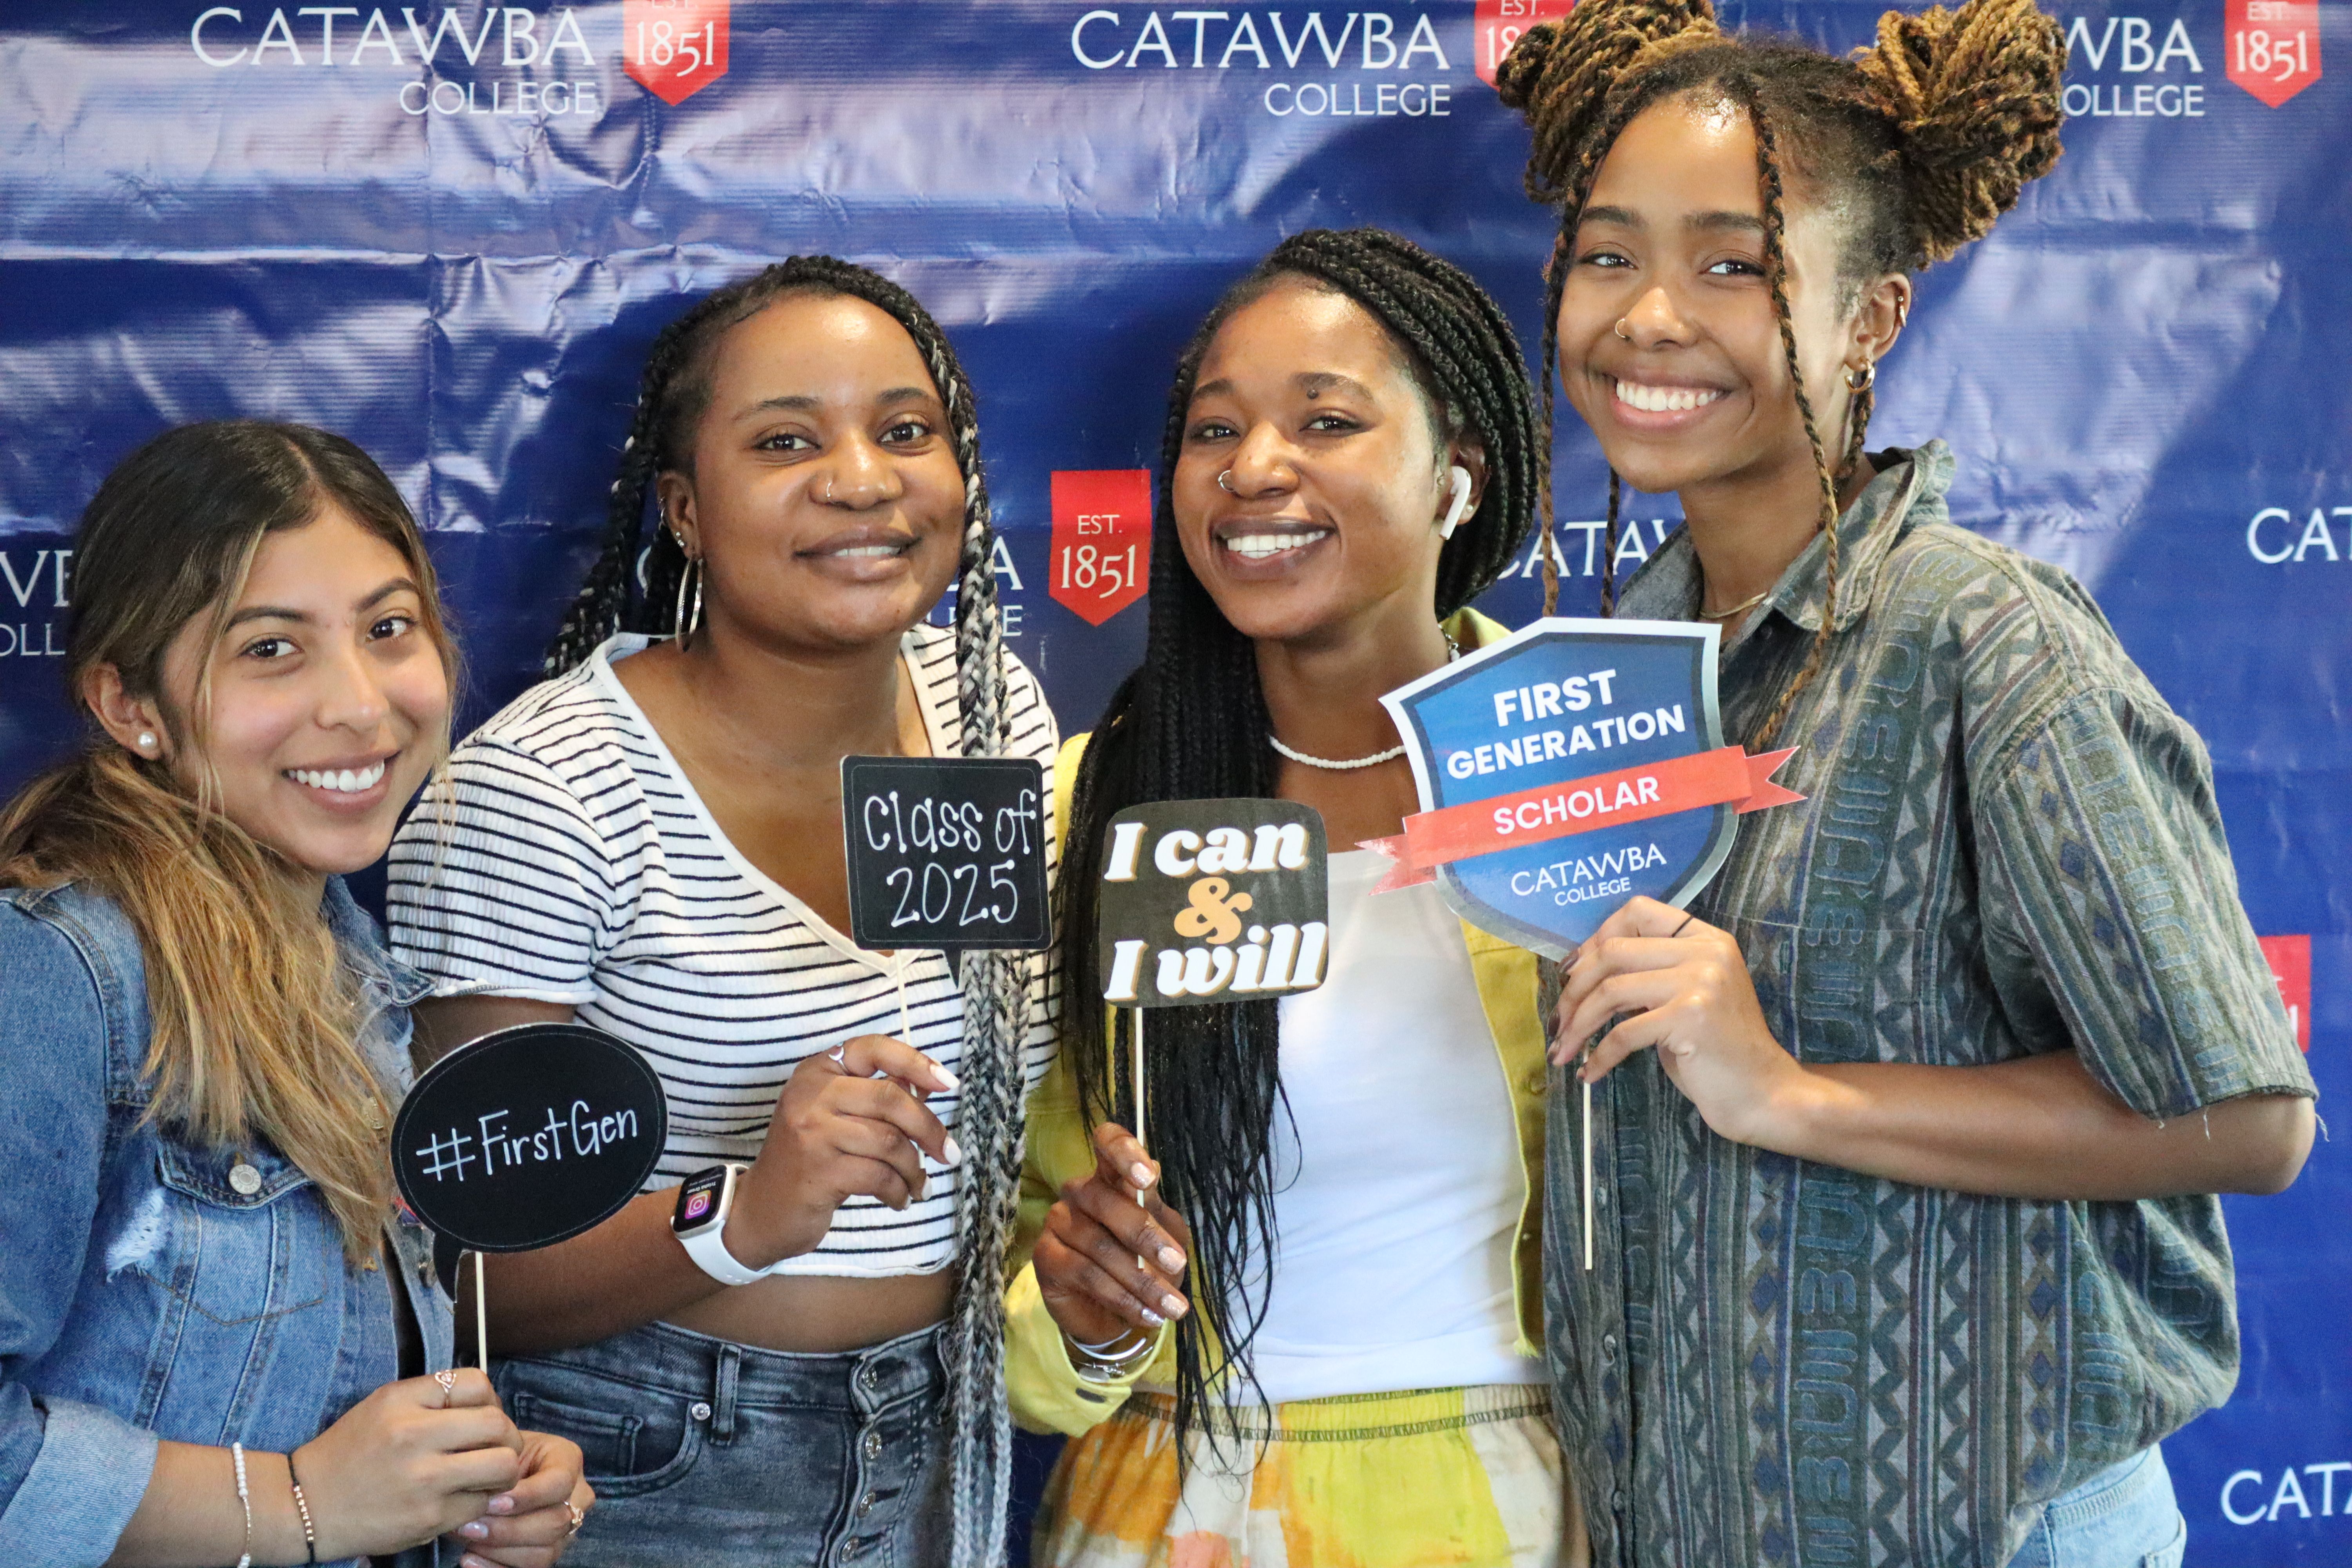 Four first-gen students at a photo booth at Catawba College event